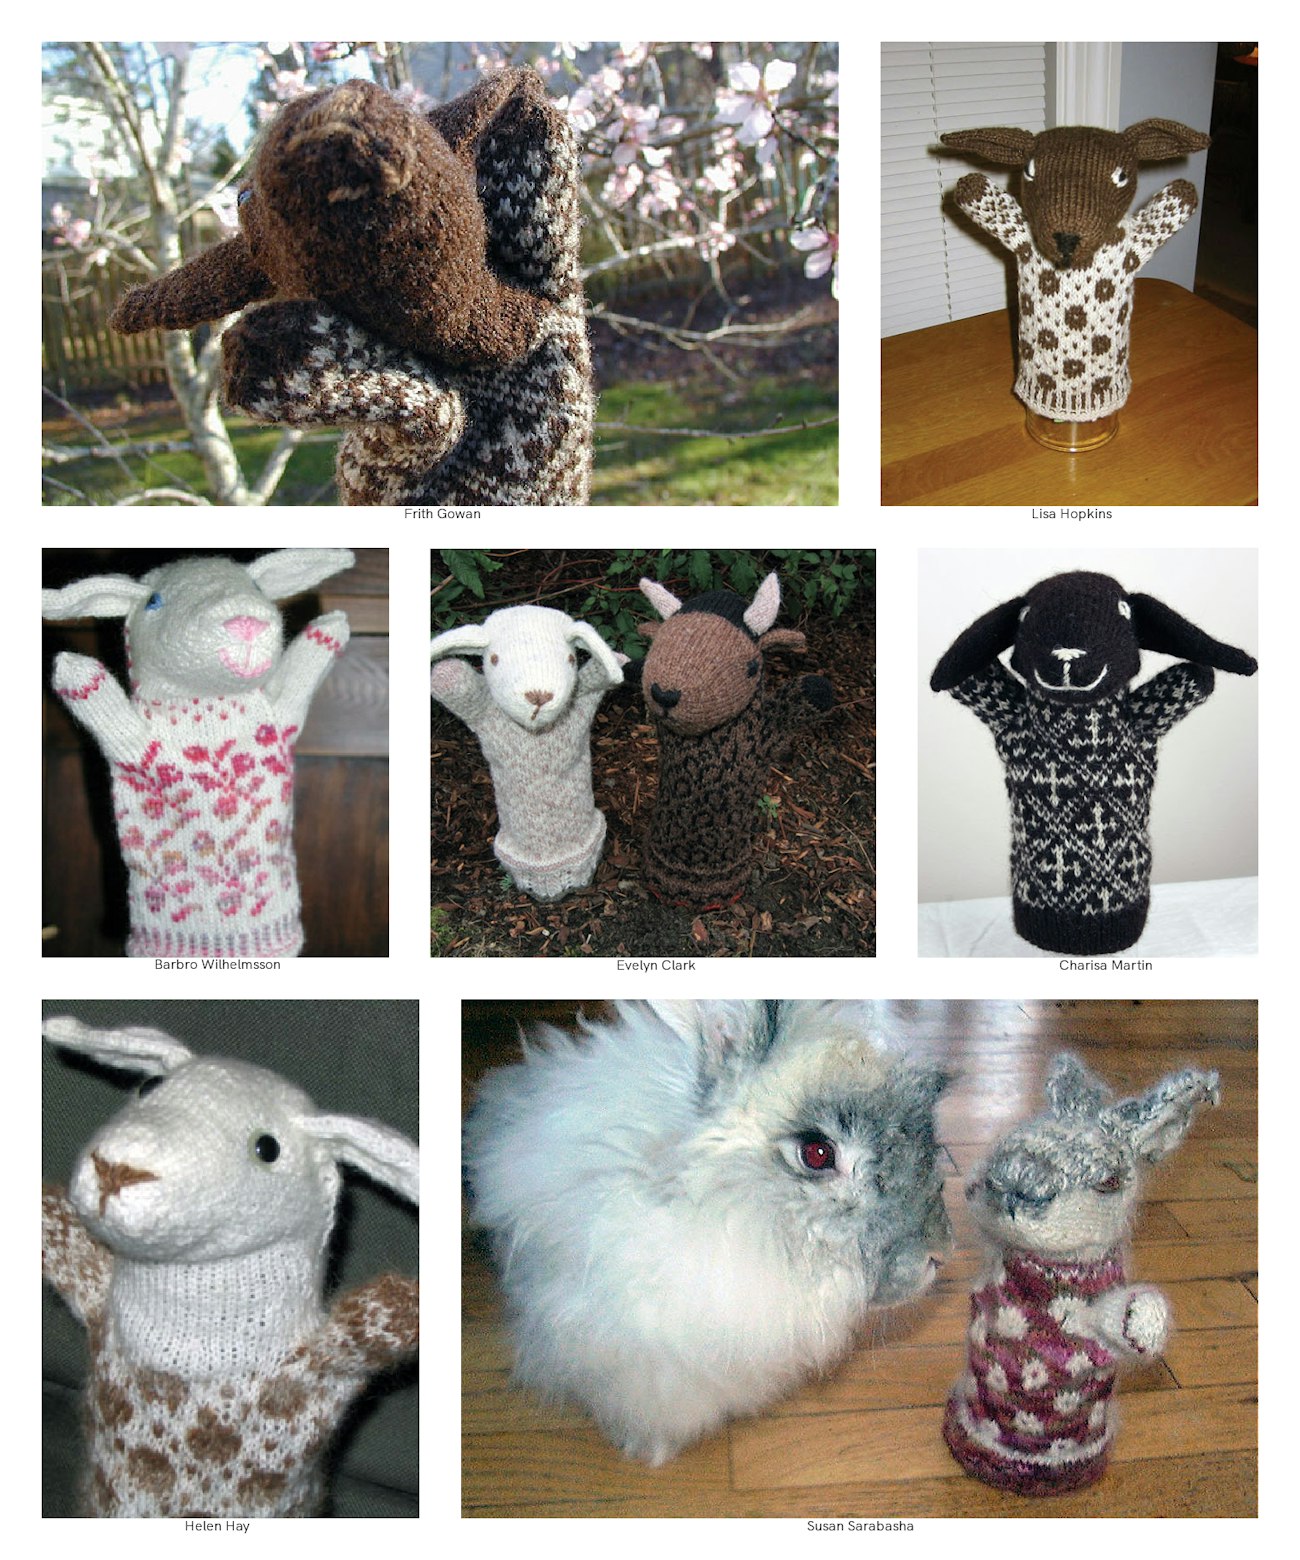 Gallery of finished Estonian Hand Puppets, from various contributors.